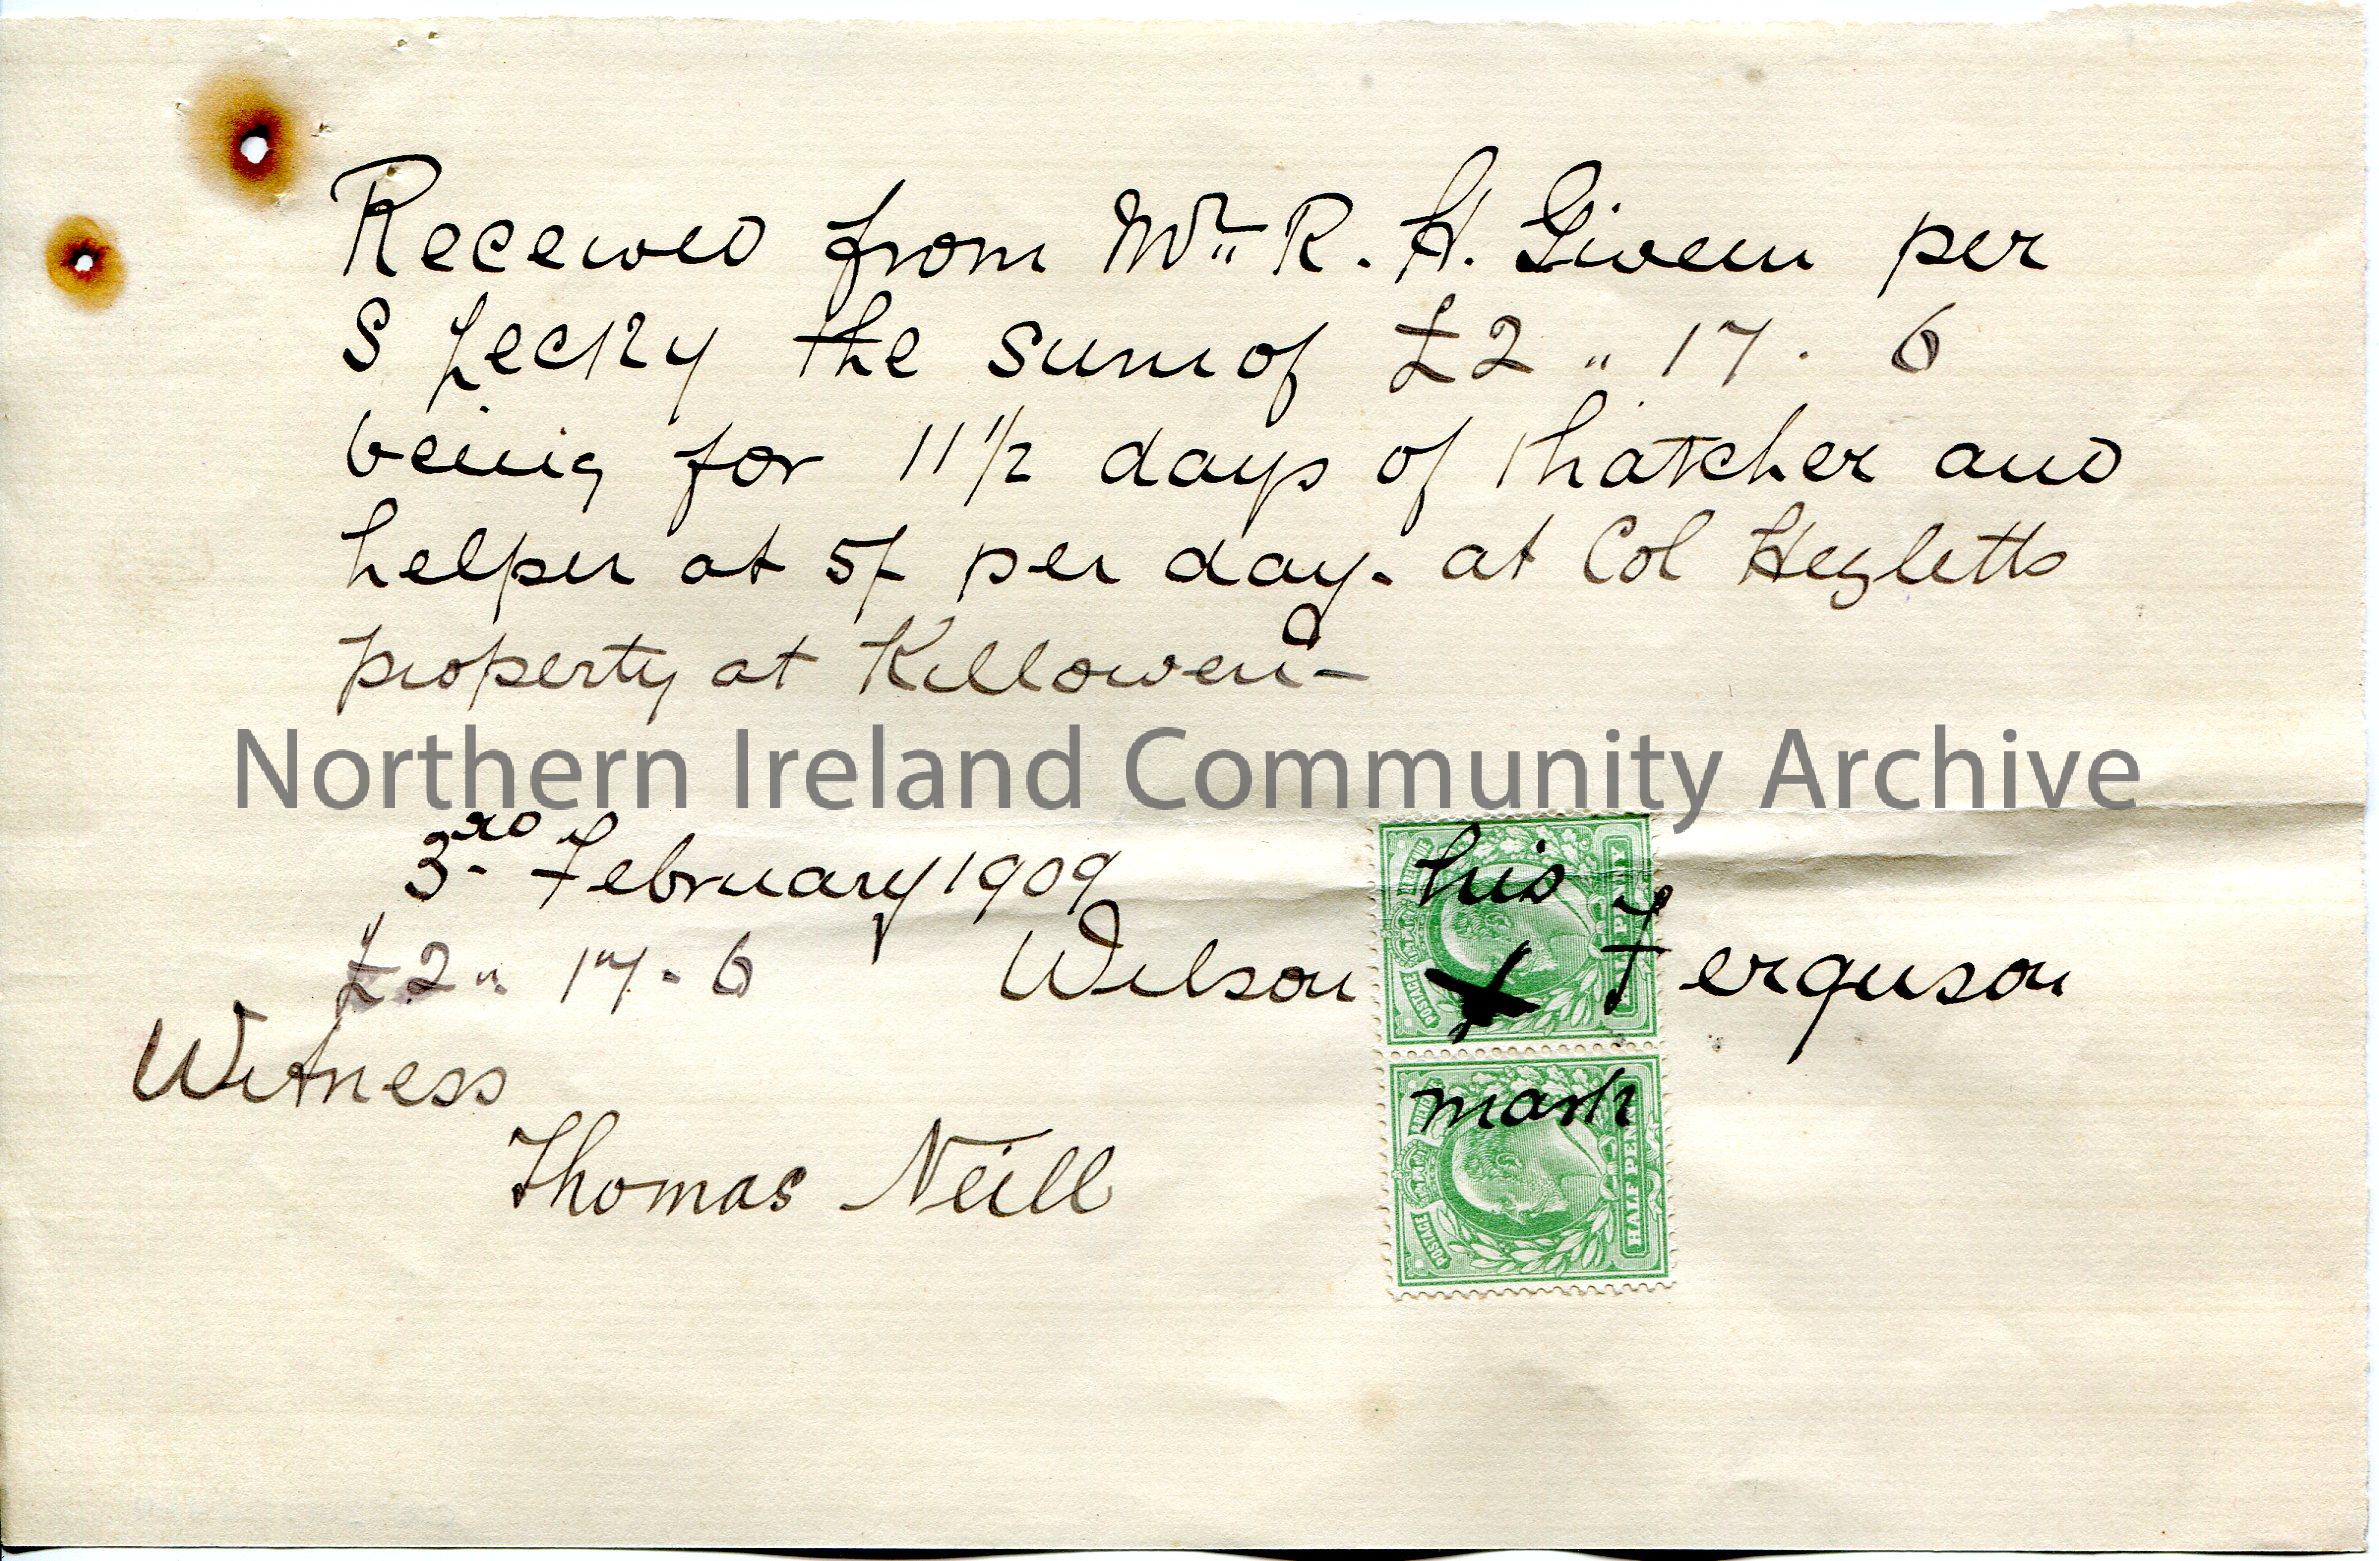 Handwritten receipt for 11 1/2 days thatching plus help at Col Hezlett’s [Hezlet] property at Killowen. Payment received from Mr R H Giveen for S [Sam…